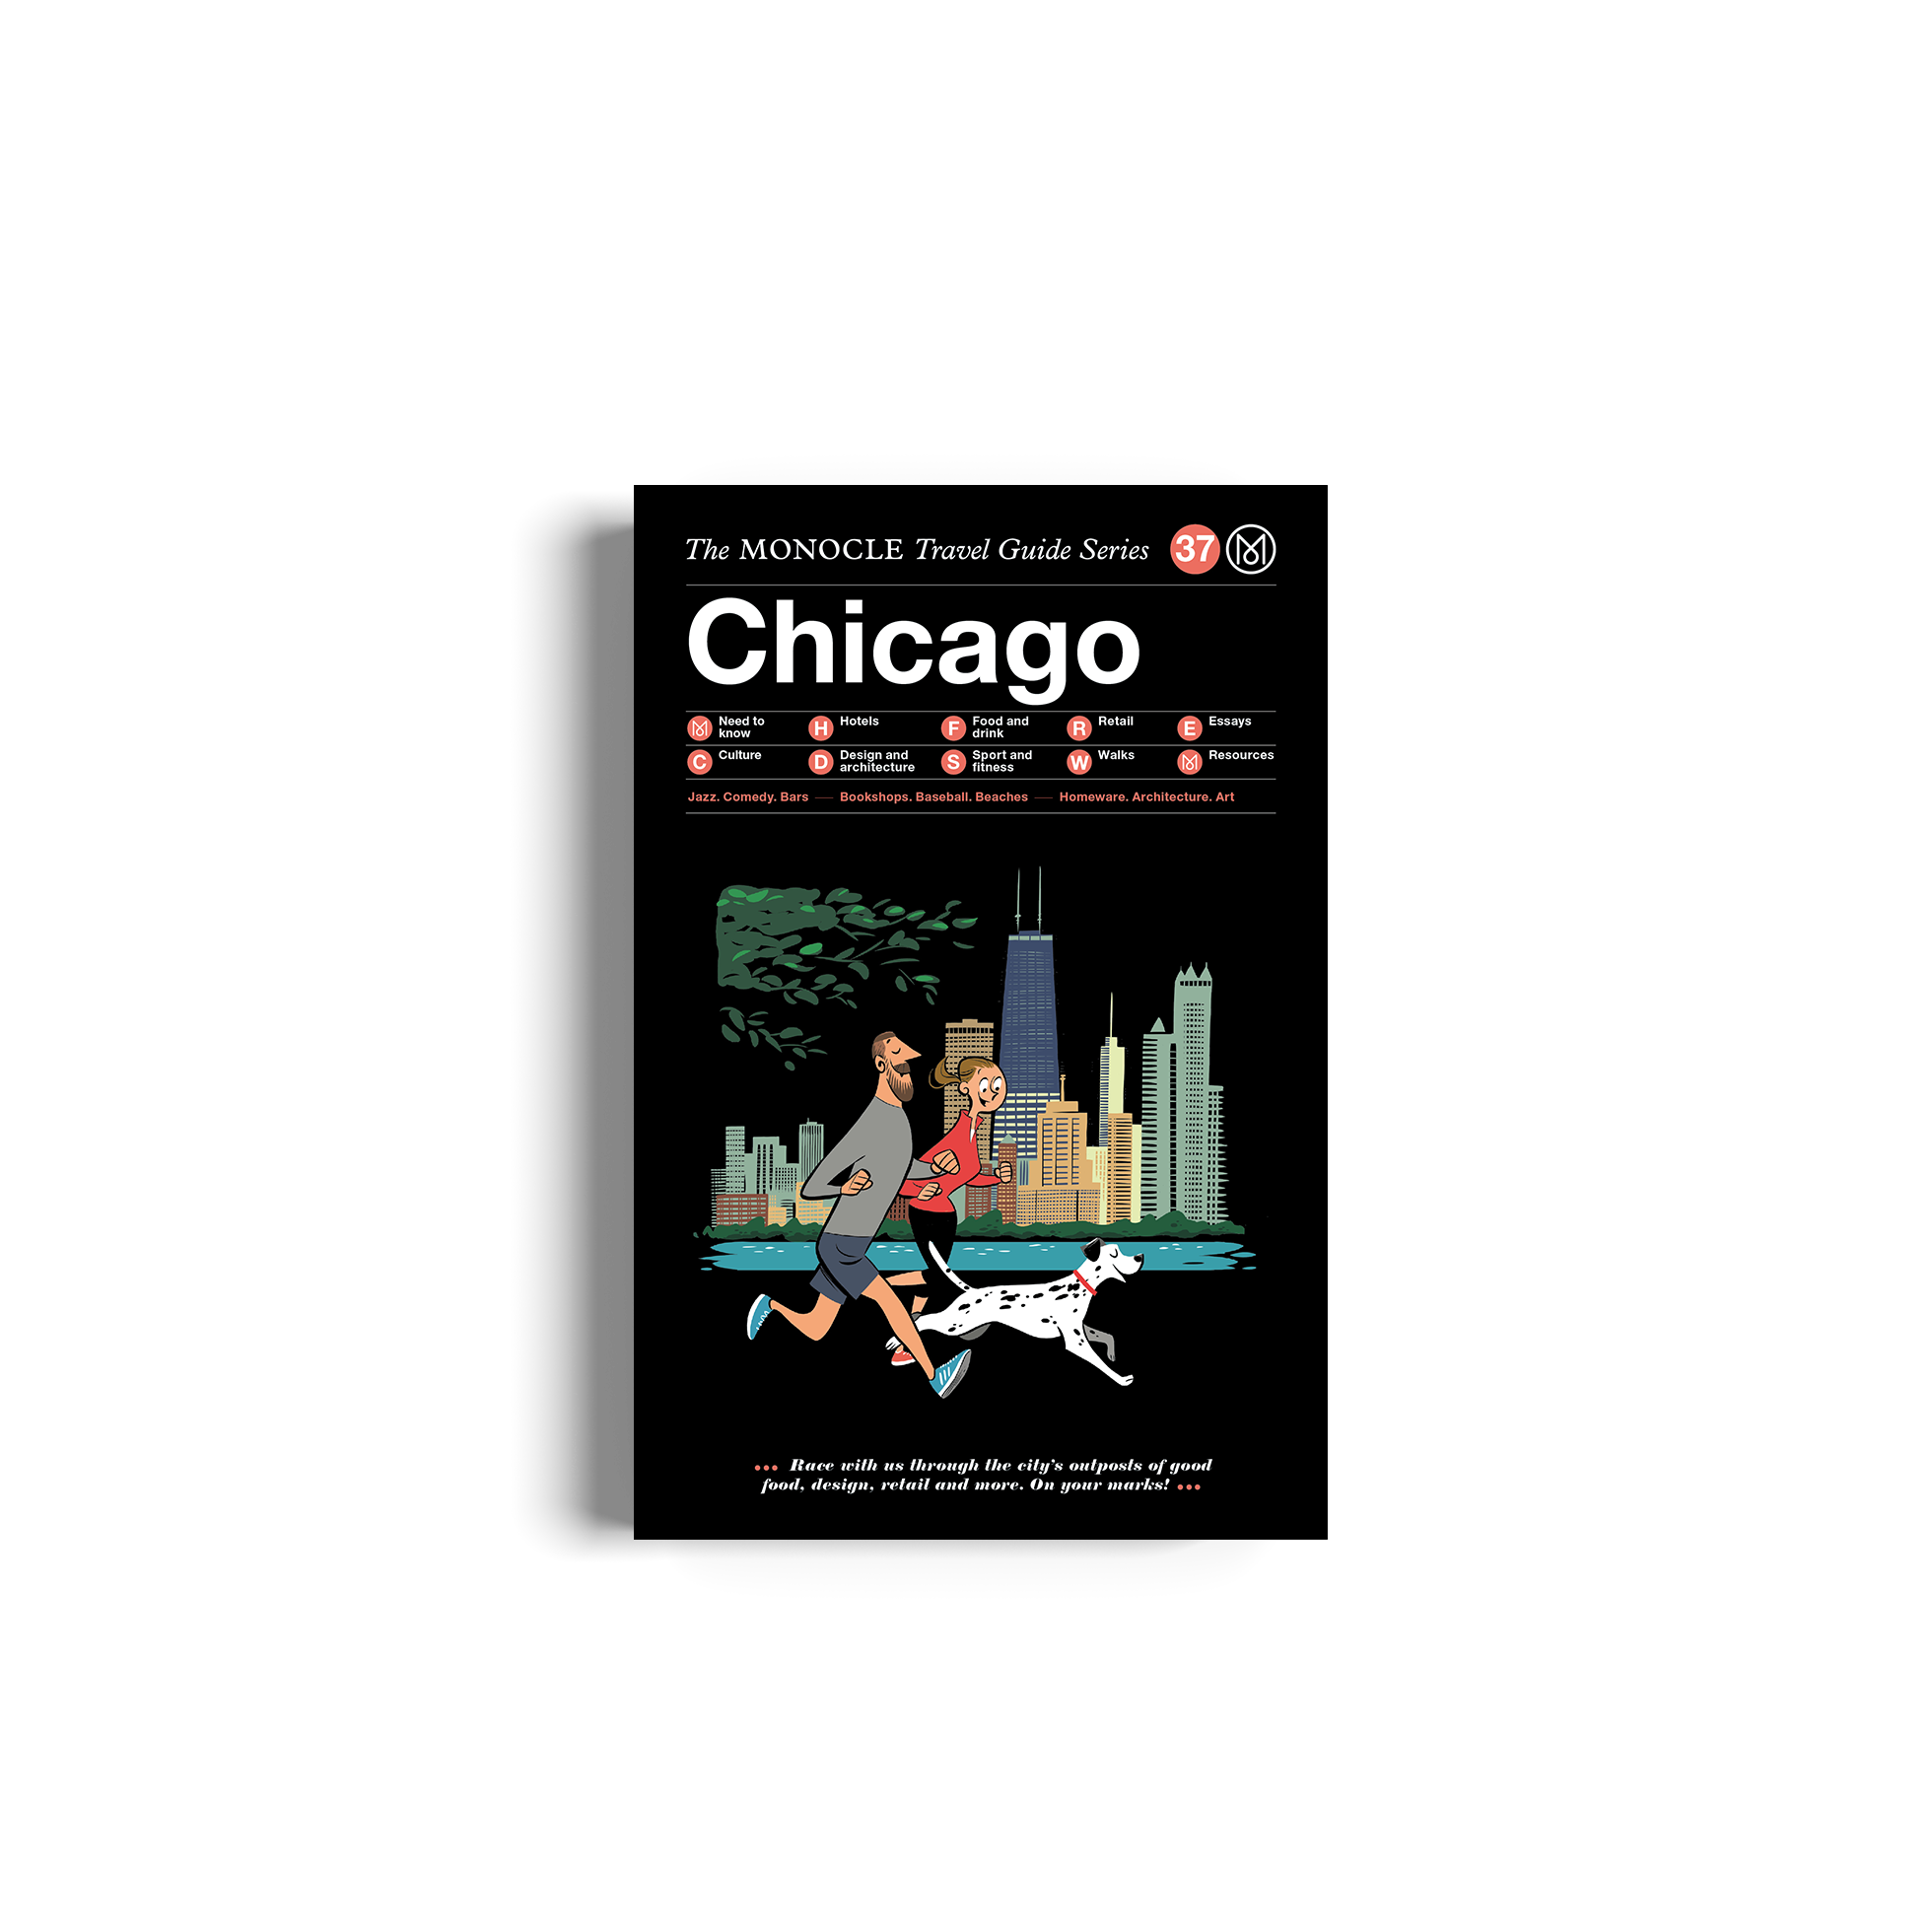 Chicago: The Monocle Travel Guide Series